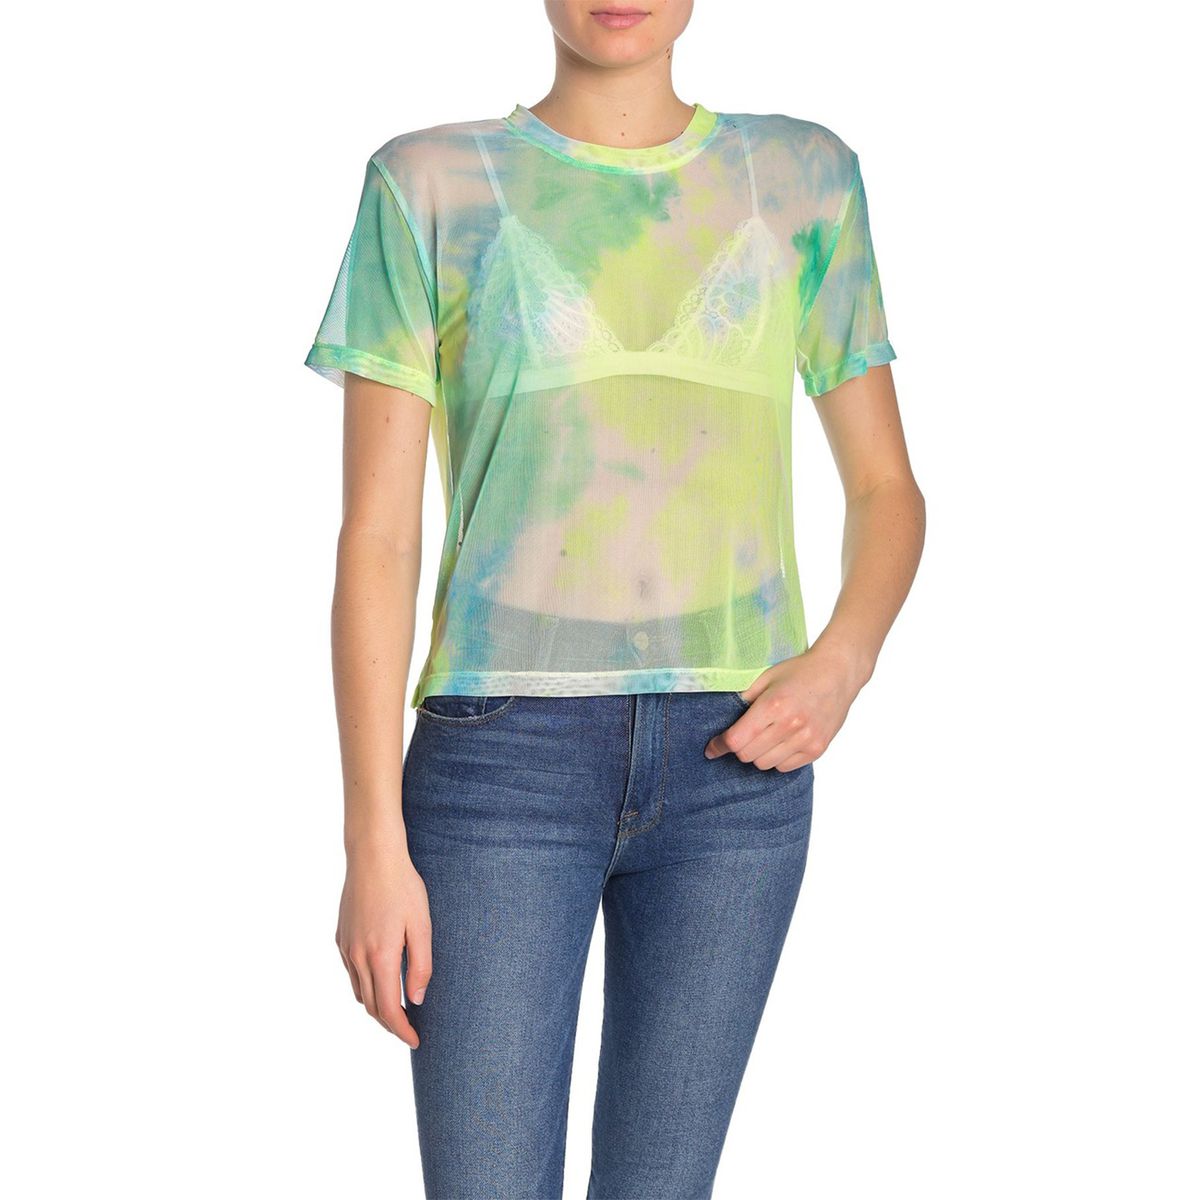 Tie-Dye Clothing Is Up to 70% Off at Nordstrom Rack | InStyle